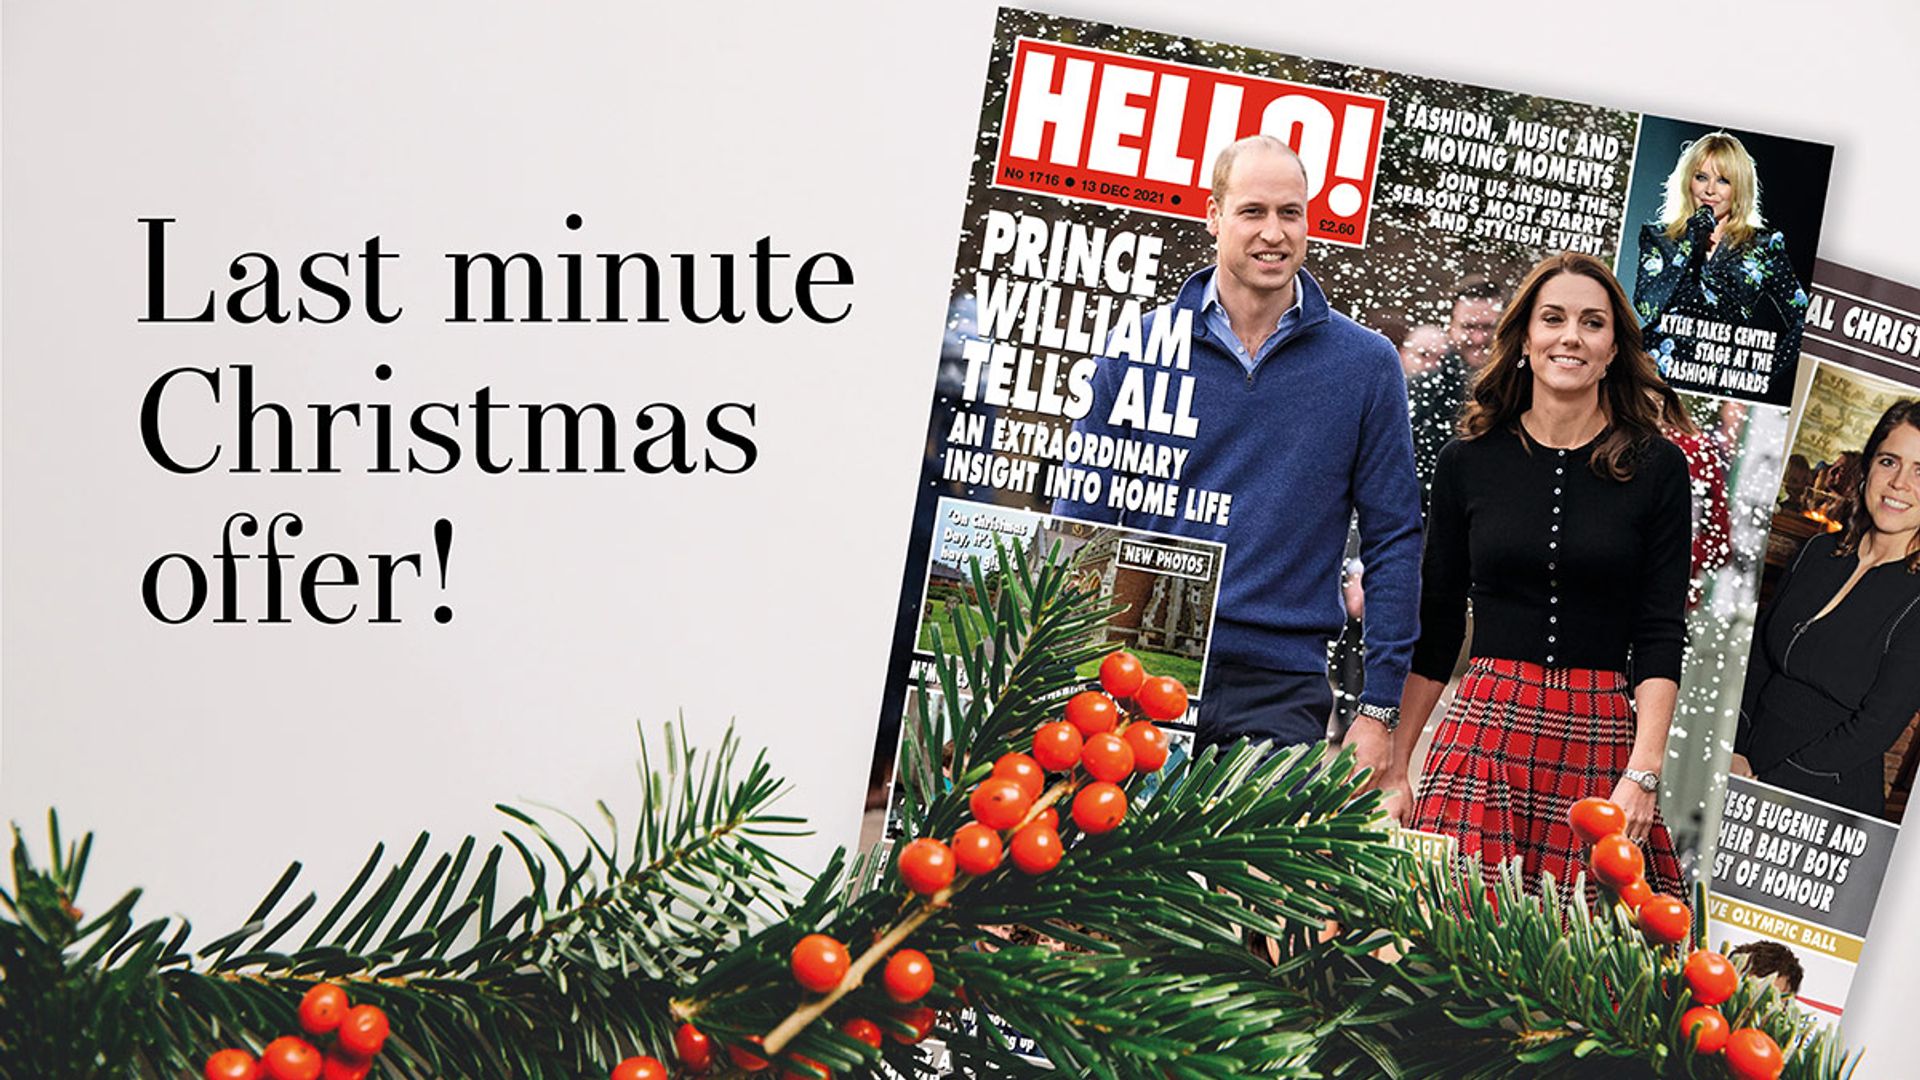 Last chance to purchase the ultimate gift this Christmas – the HELLO! Christmas subscription offer ends soon!